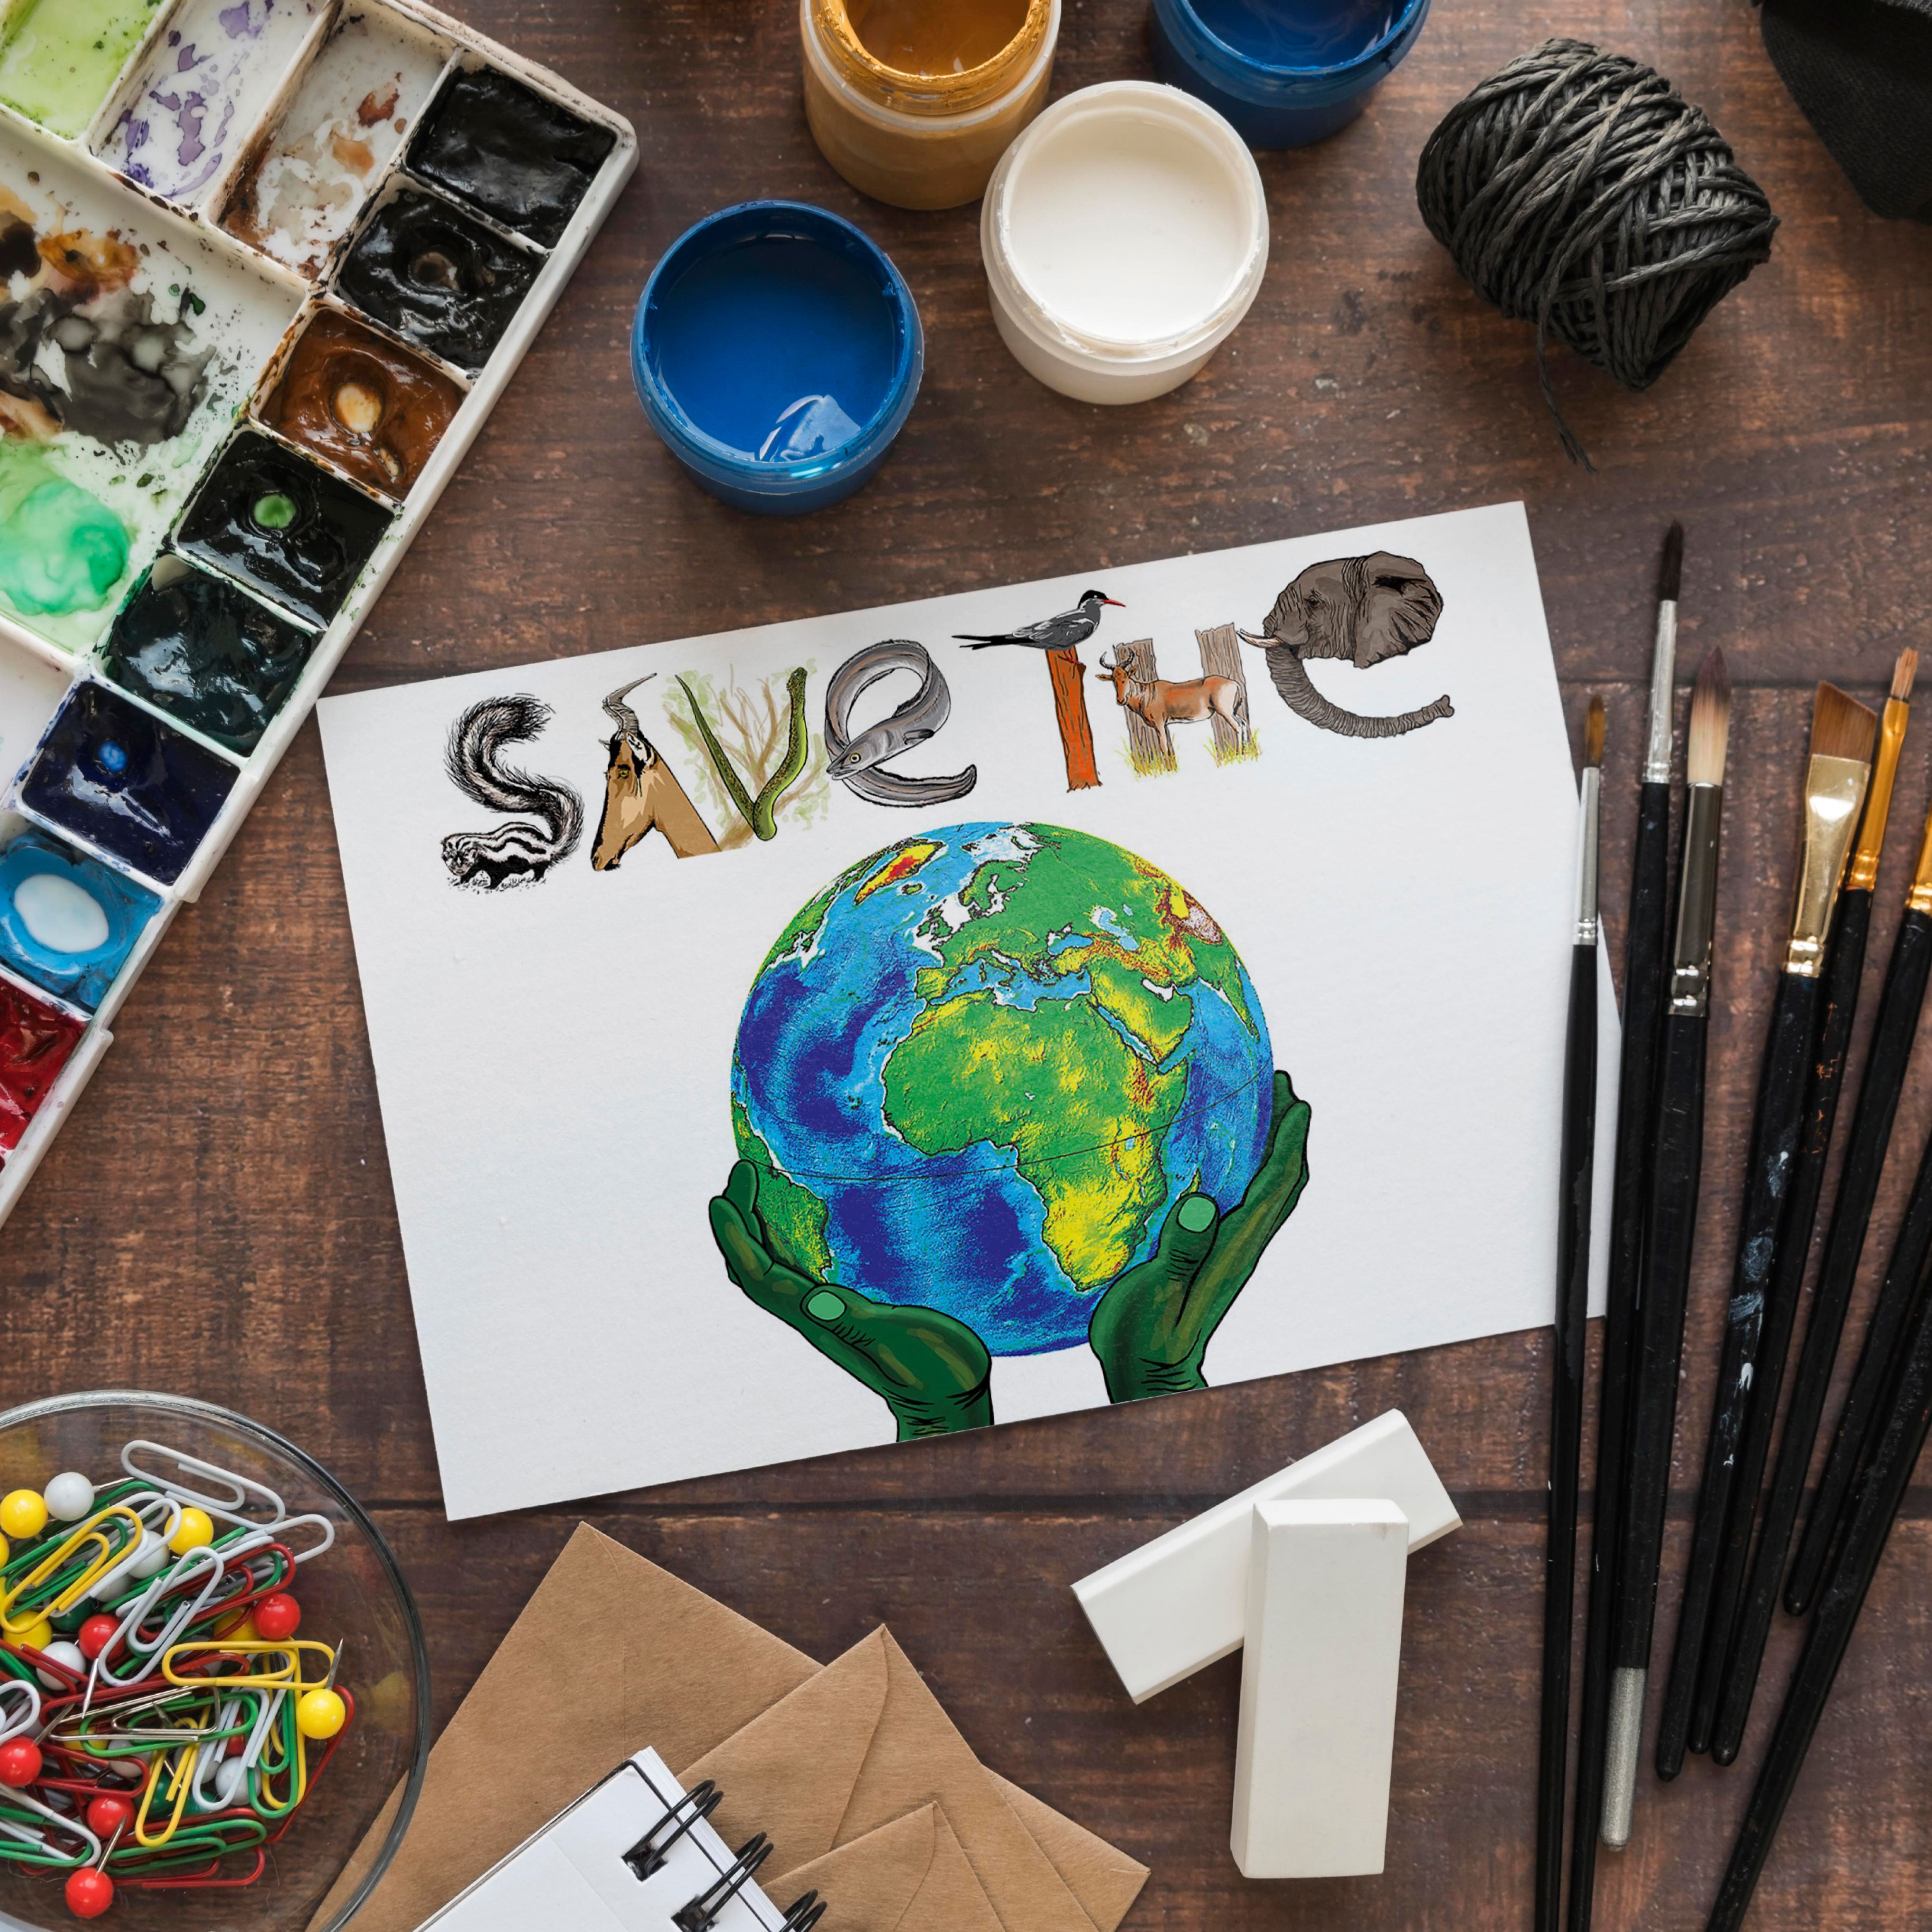 Save The Planet cover image.